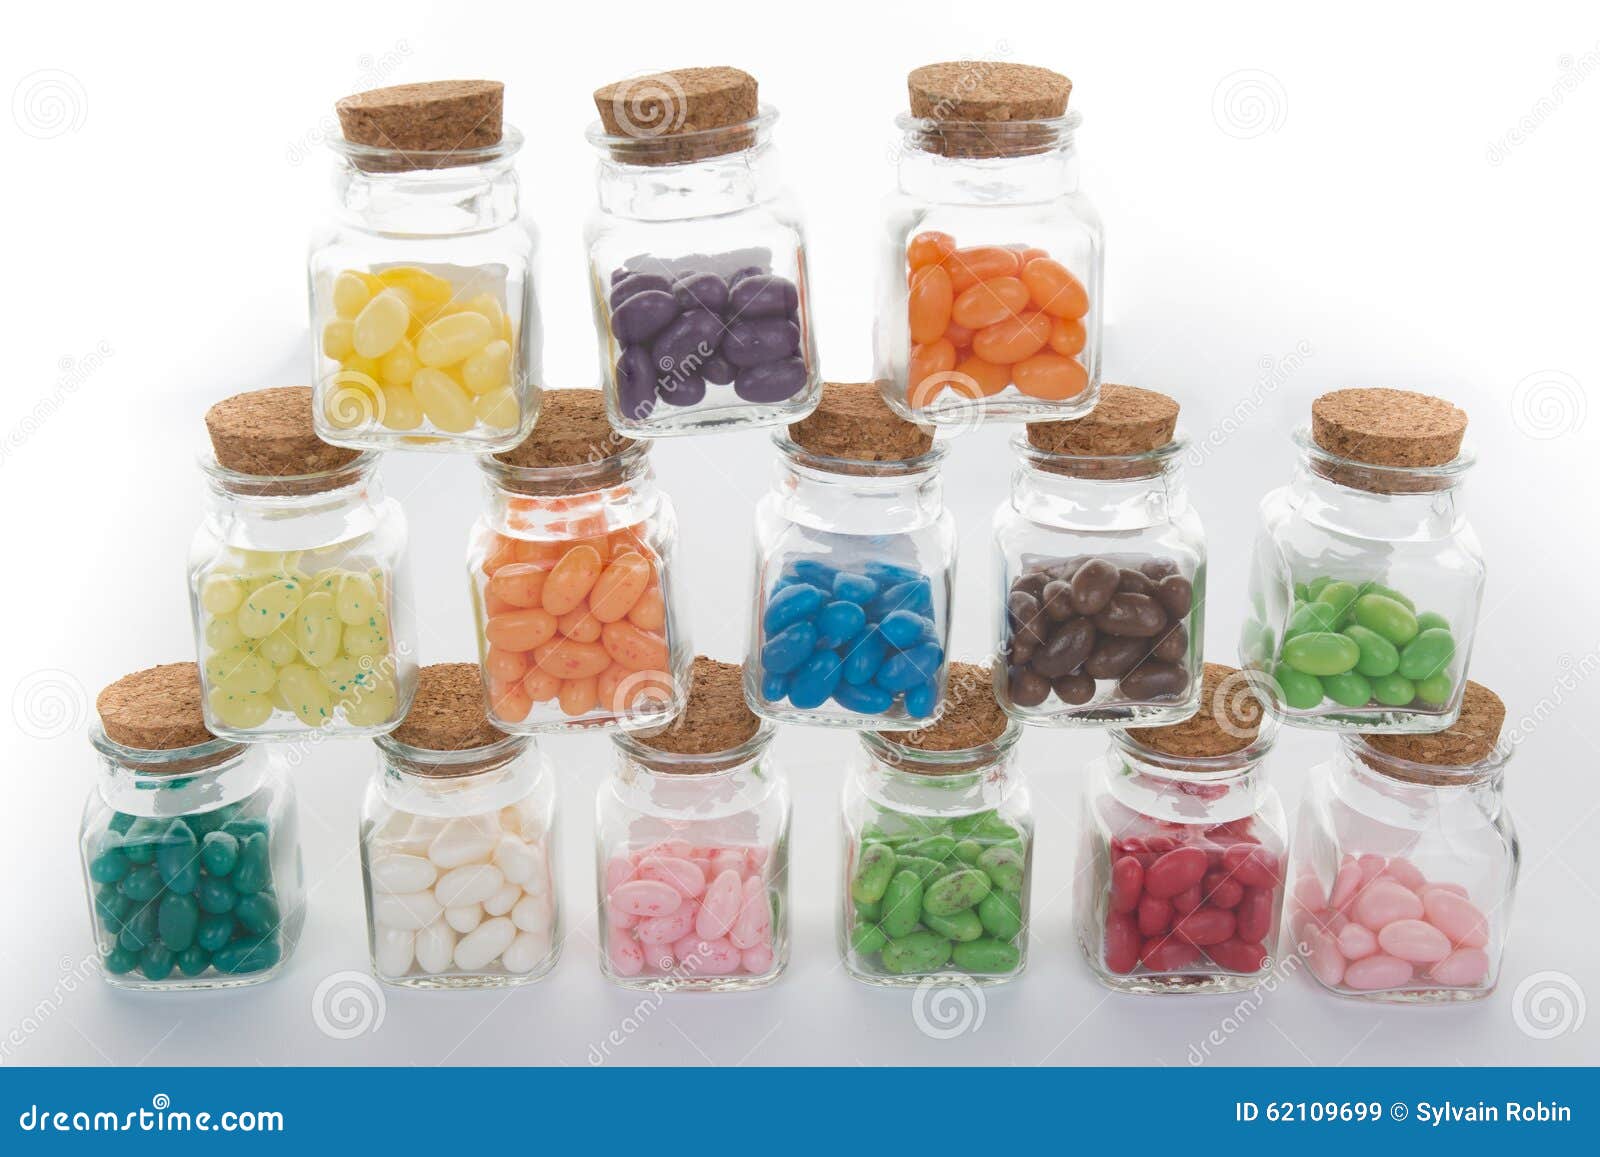 Download 479 Jelly Beans Candy Glass Jar Photos Free Royalty Free Stock Photos From Dreamstime Yellowimages Mockups